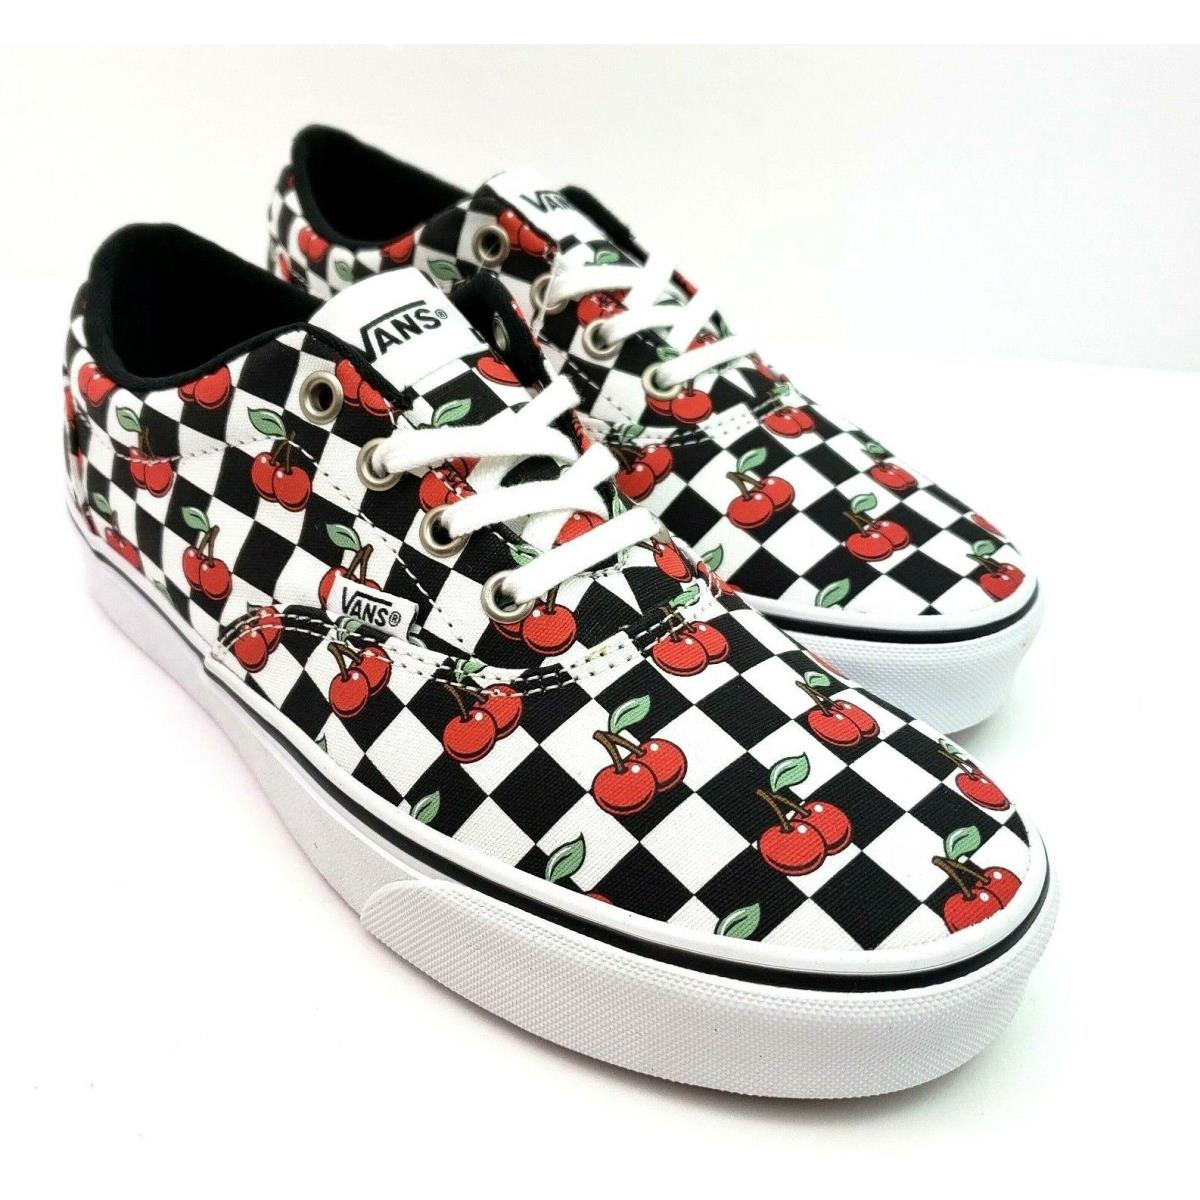 Vans Doheny Old Skool Womens Size 9 Cherry Checkered Low Skate Sneaker Shoes